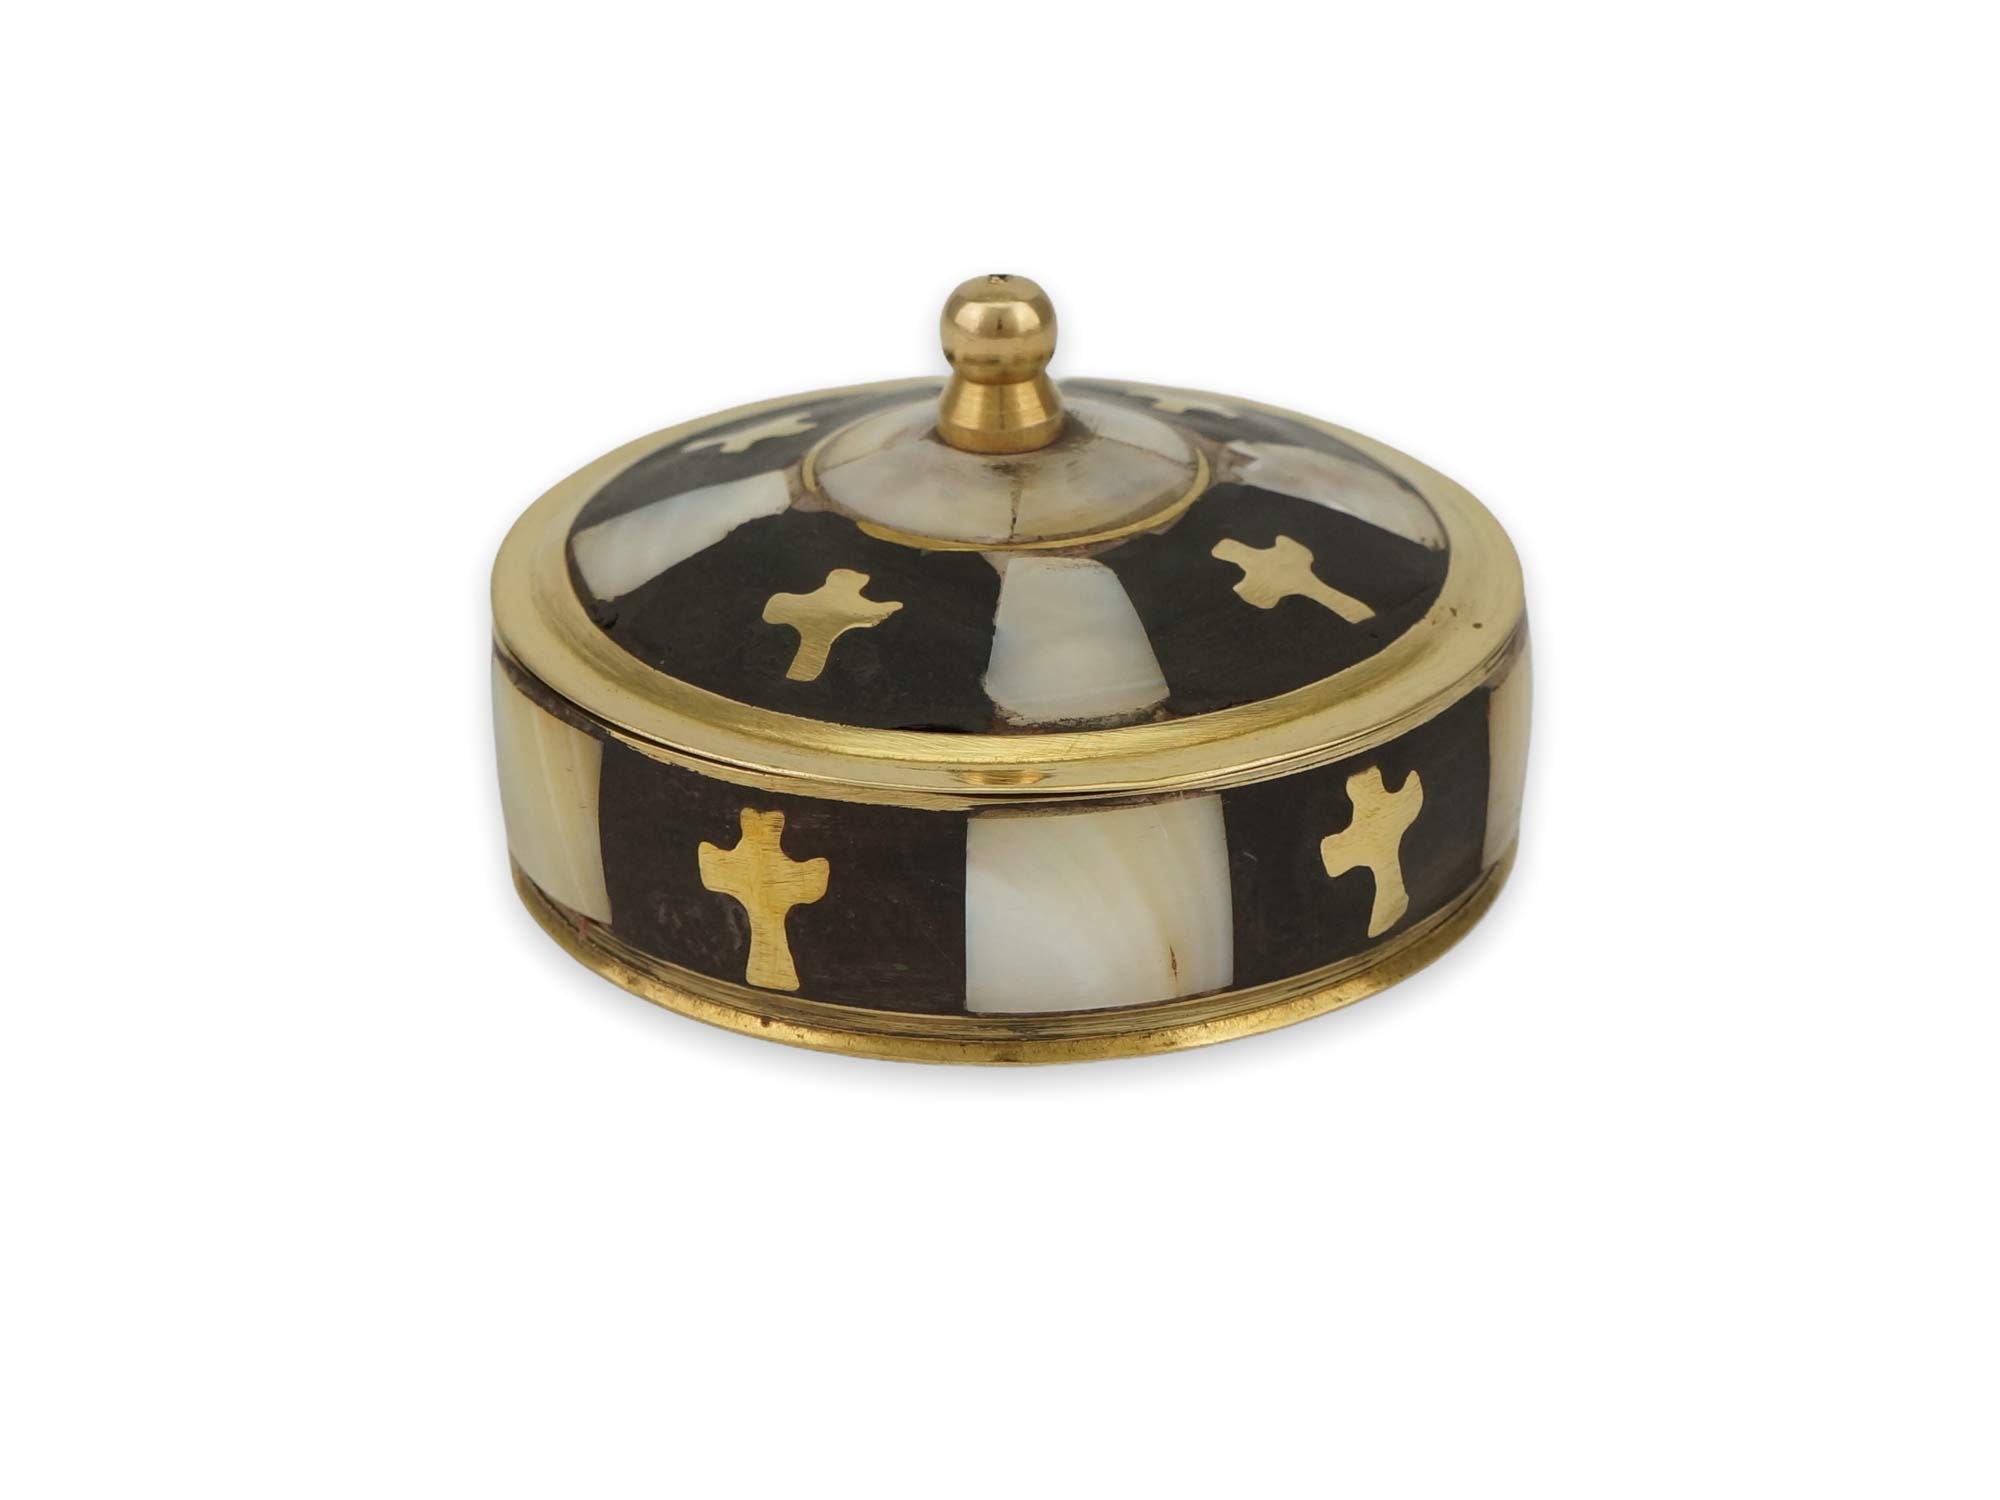 Wooden Trinket Box with Lid and Metal Cross Decoration - BlessedMart